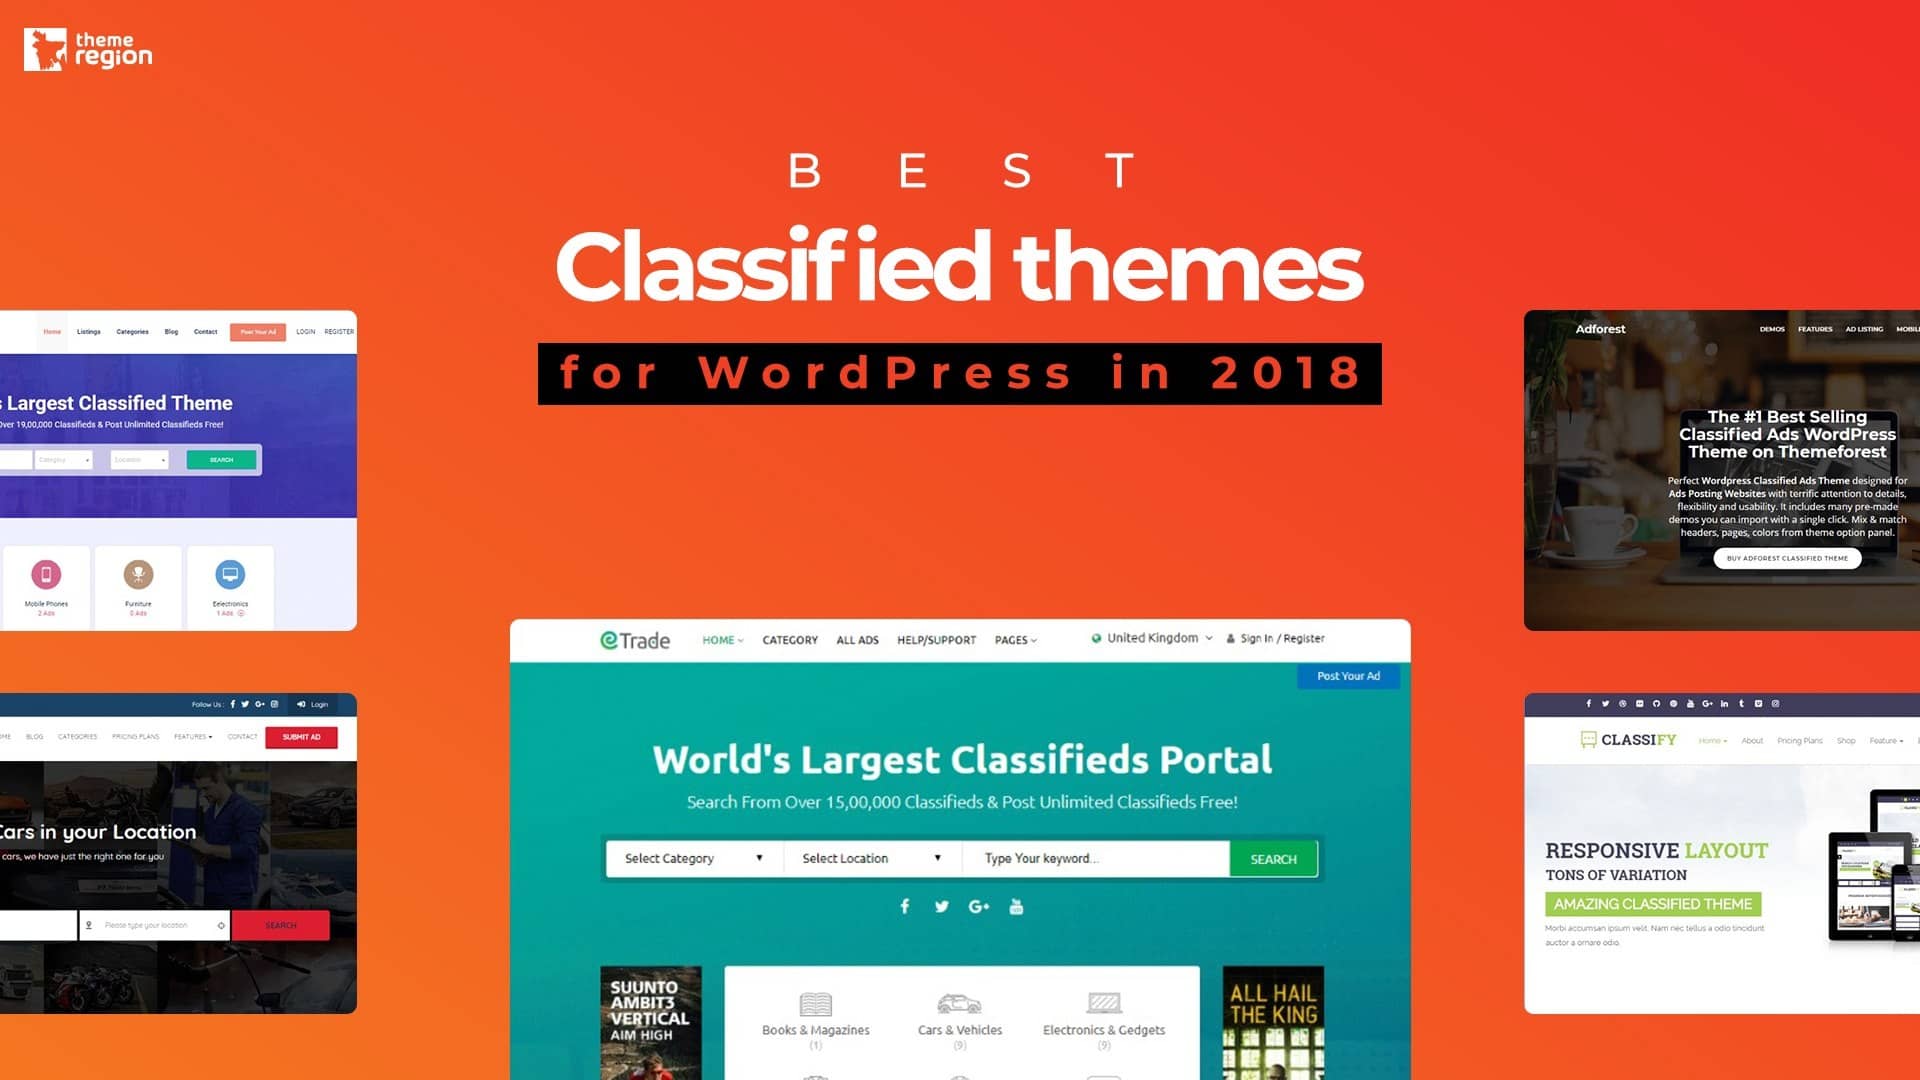 Best 5 Classified themes in 2020